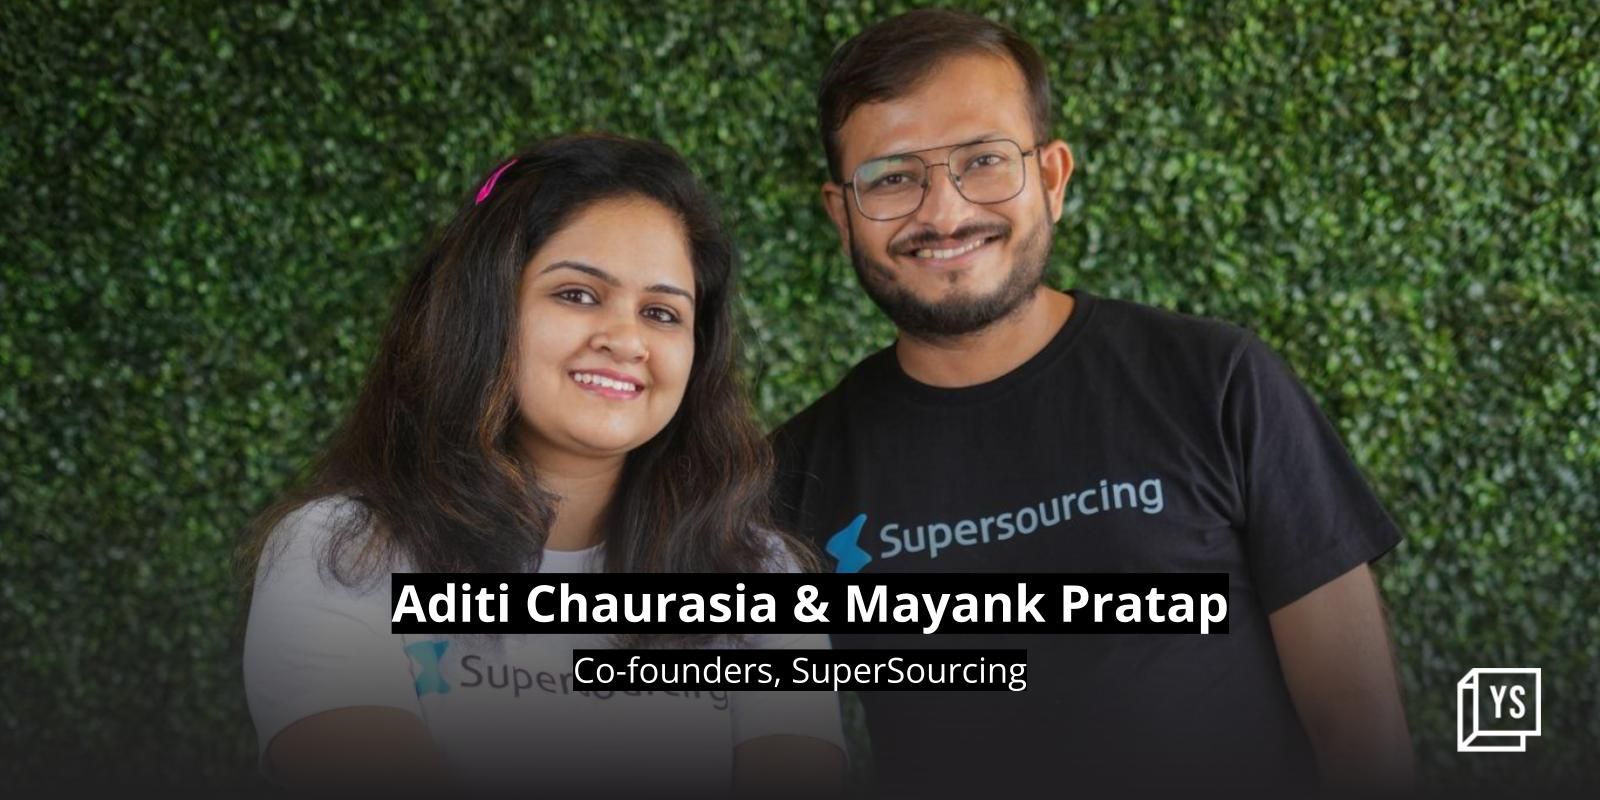 A startup from Indore is helping businesses onboard tech talent